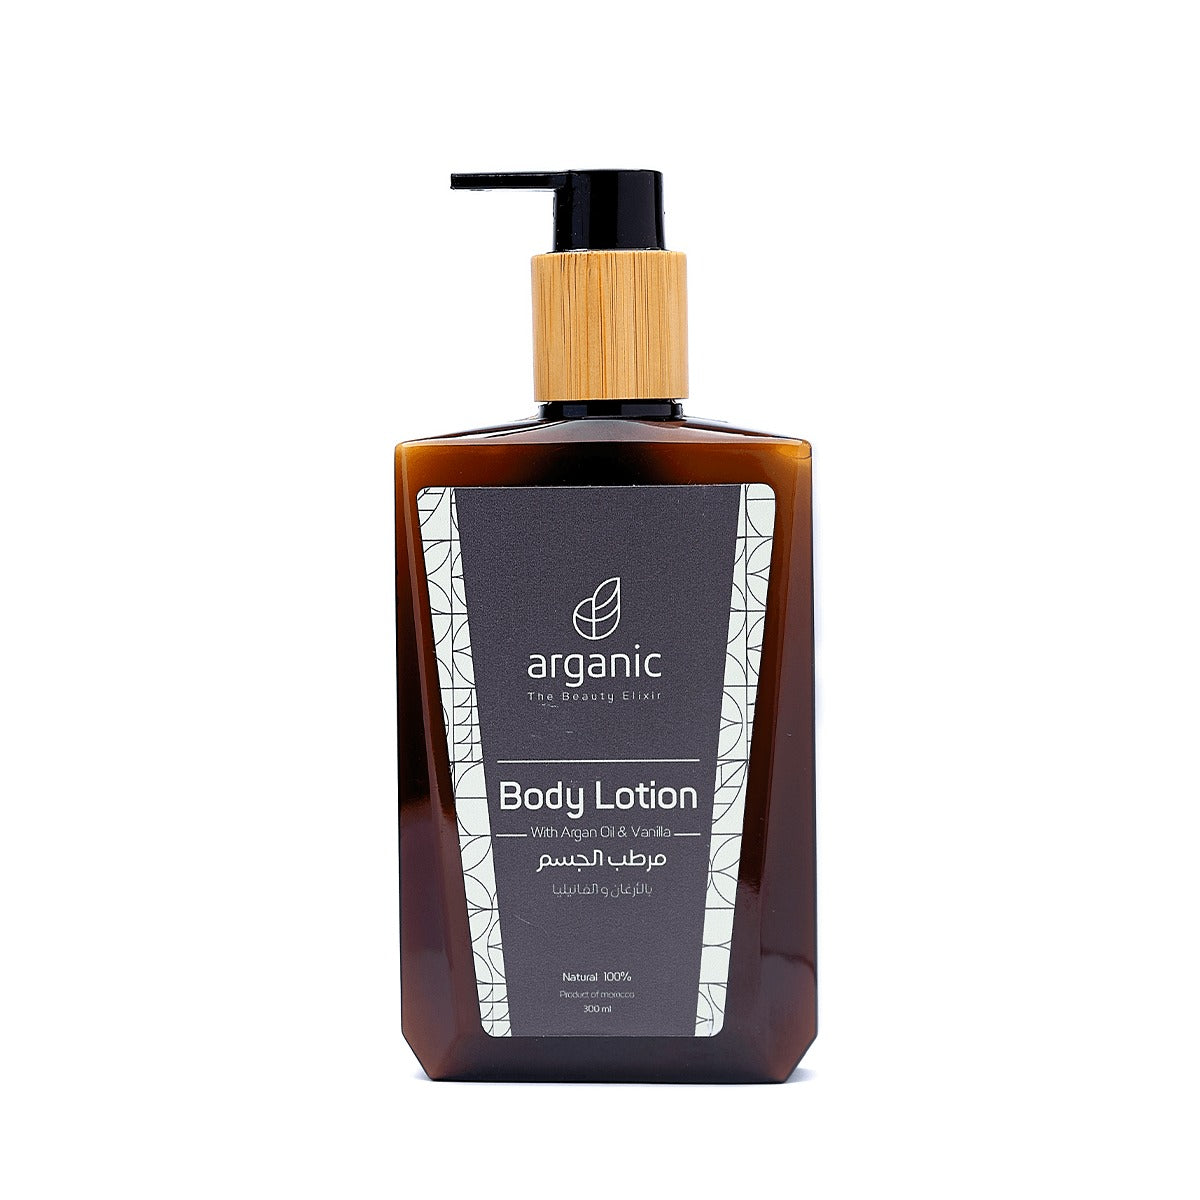 Natural body lotion with argan oil and vanilla fragrance.